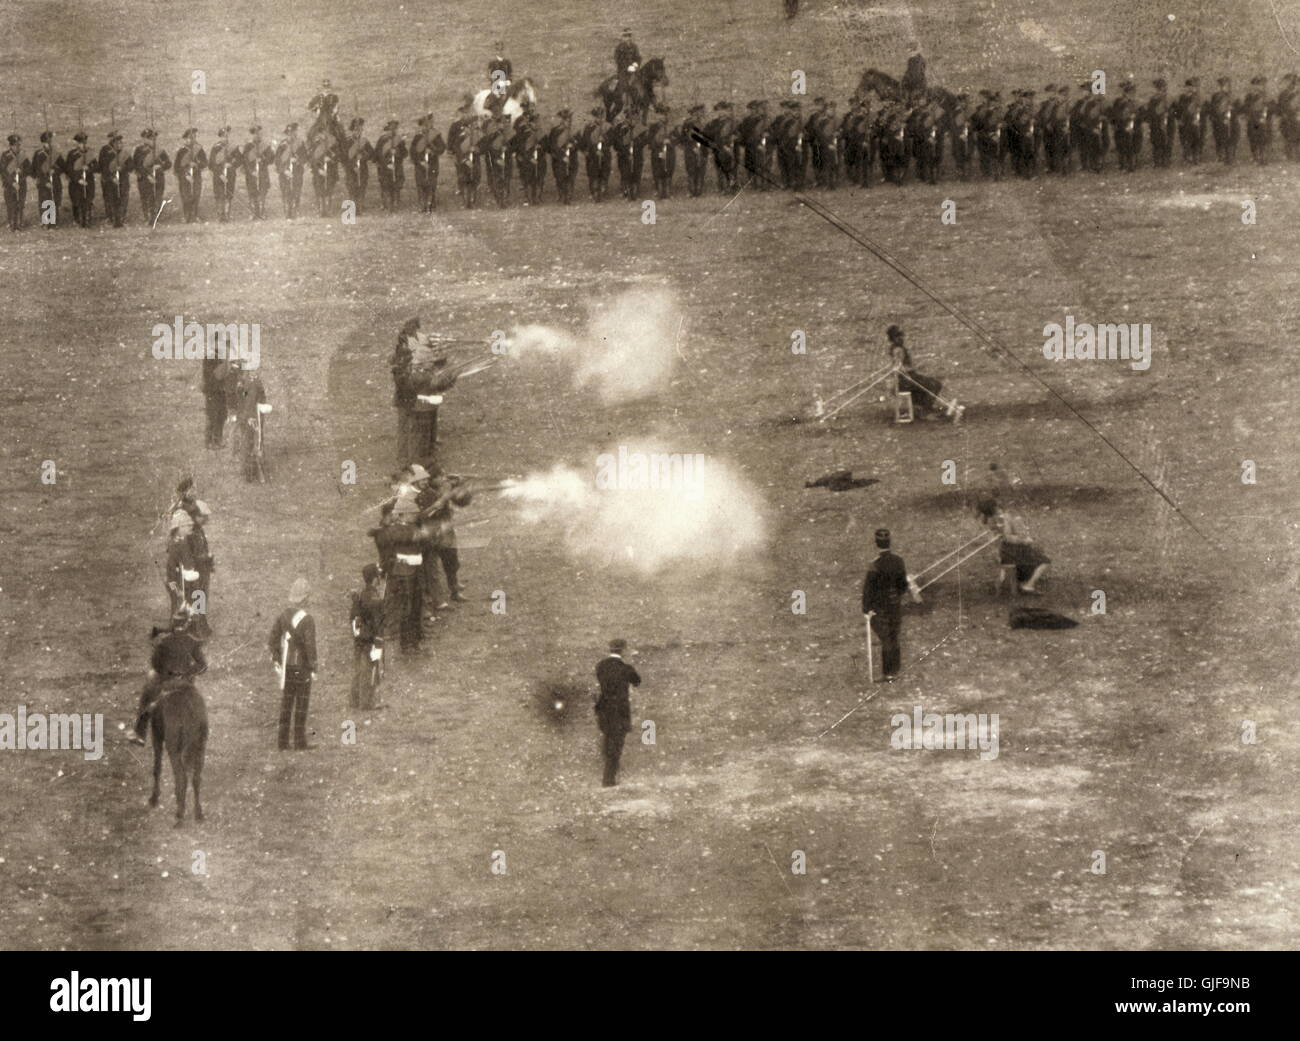 AJAX NEWS & FEATURE SERVICE. SEPT, 1899. LOCATION UNKNOWN. - MILITARY DOUBLE EXECUTION OF TWO SOLDIERS IN REGIMENT WHO SHOT A NON COMMISSIONED OFFICER. REGIMENT UNKNOWN; LOCATION UNKNOWN. DETAIL FROM LARGER PIC.  PHOTOGRAPHER:UNKNOWN  © DIGITAL IMAGE COPYRIGHT AJAX VINTAGE PICTURE LIBRARY  SOURCE: AJAX VINTAGE PICTURE LIBRARY COLLECTION  REF: EXEC 1899 DET Stock Photo